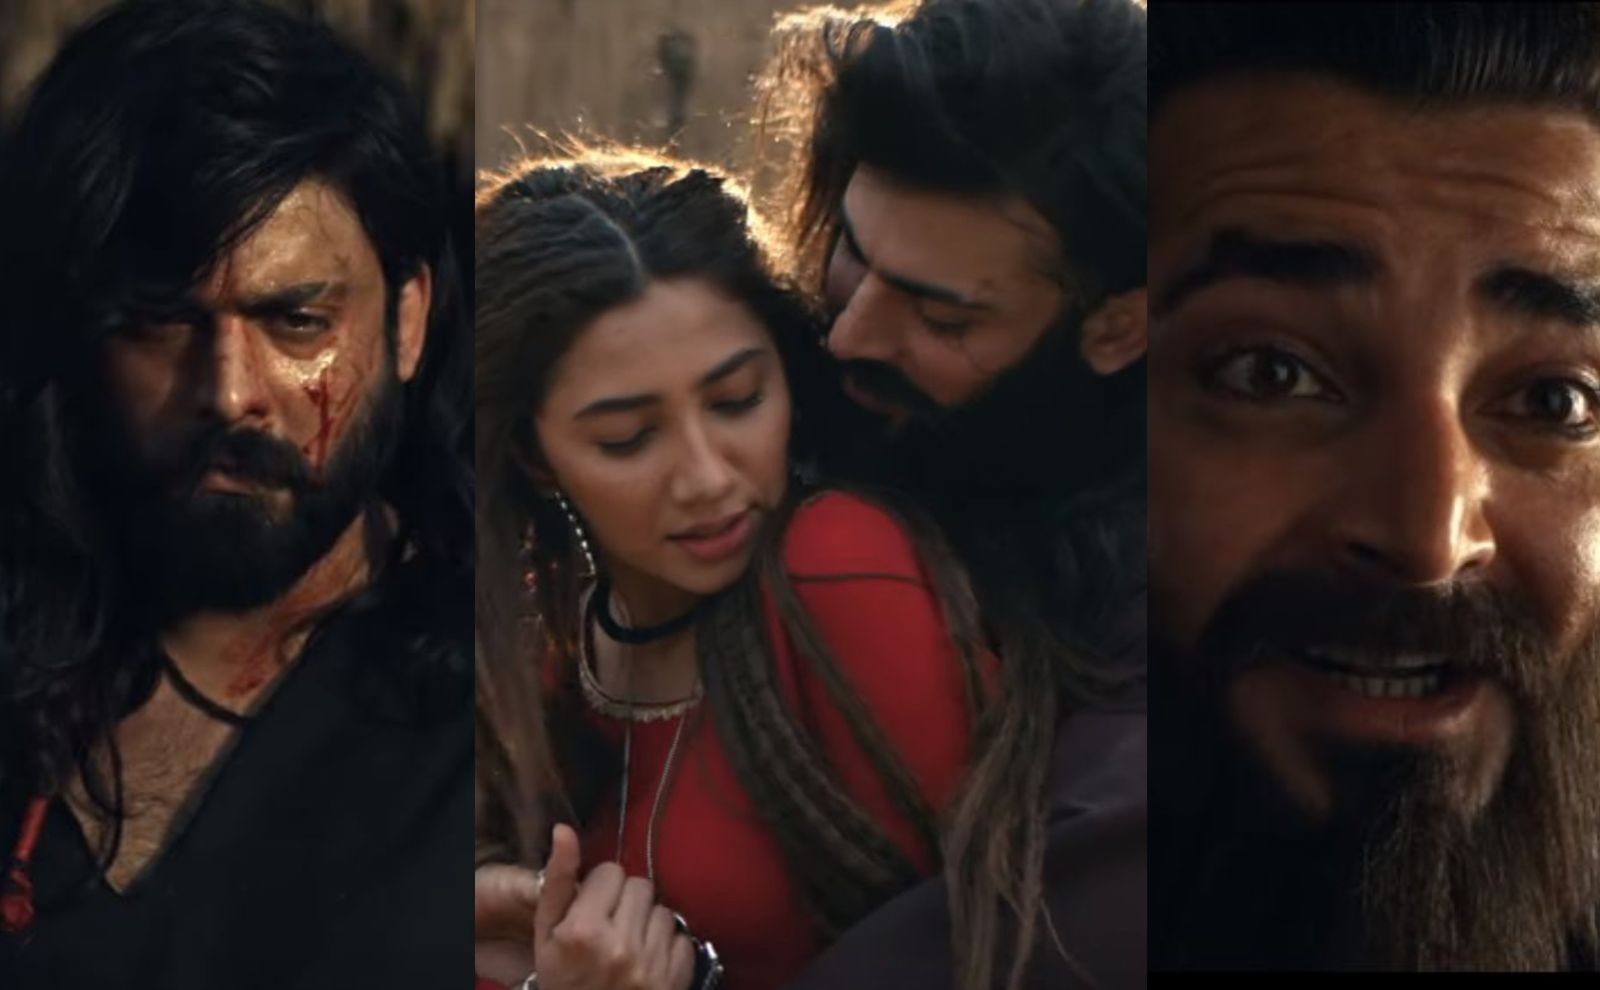 Fawad Khan's The Legend Of Maula Jatt Trailer Is Giving Us Way Too Many Feelings To Contain Ourselves!